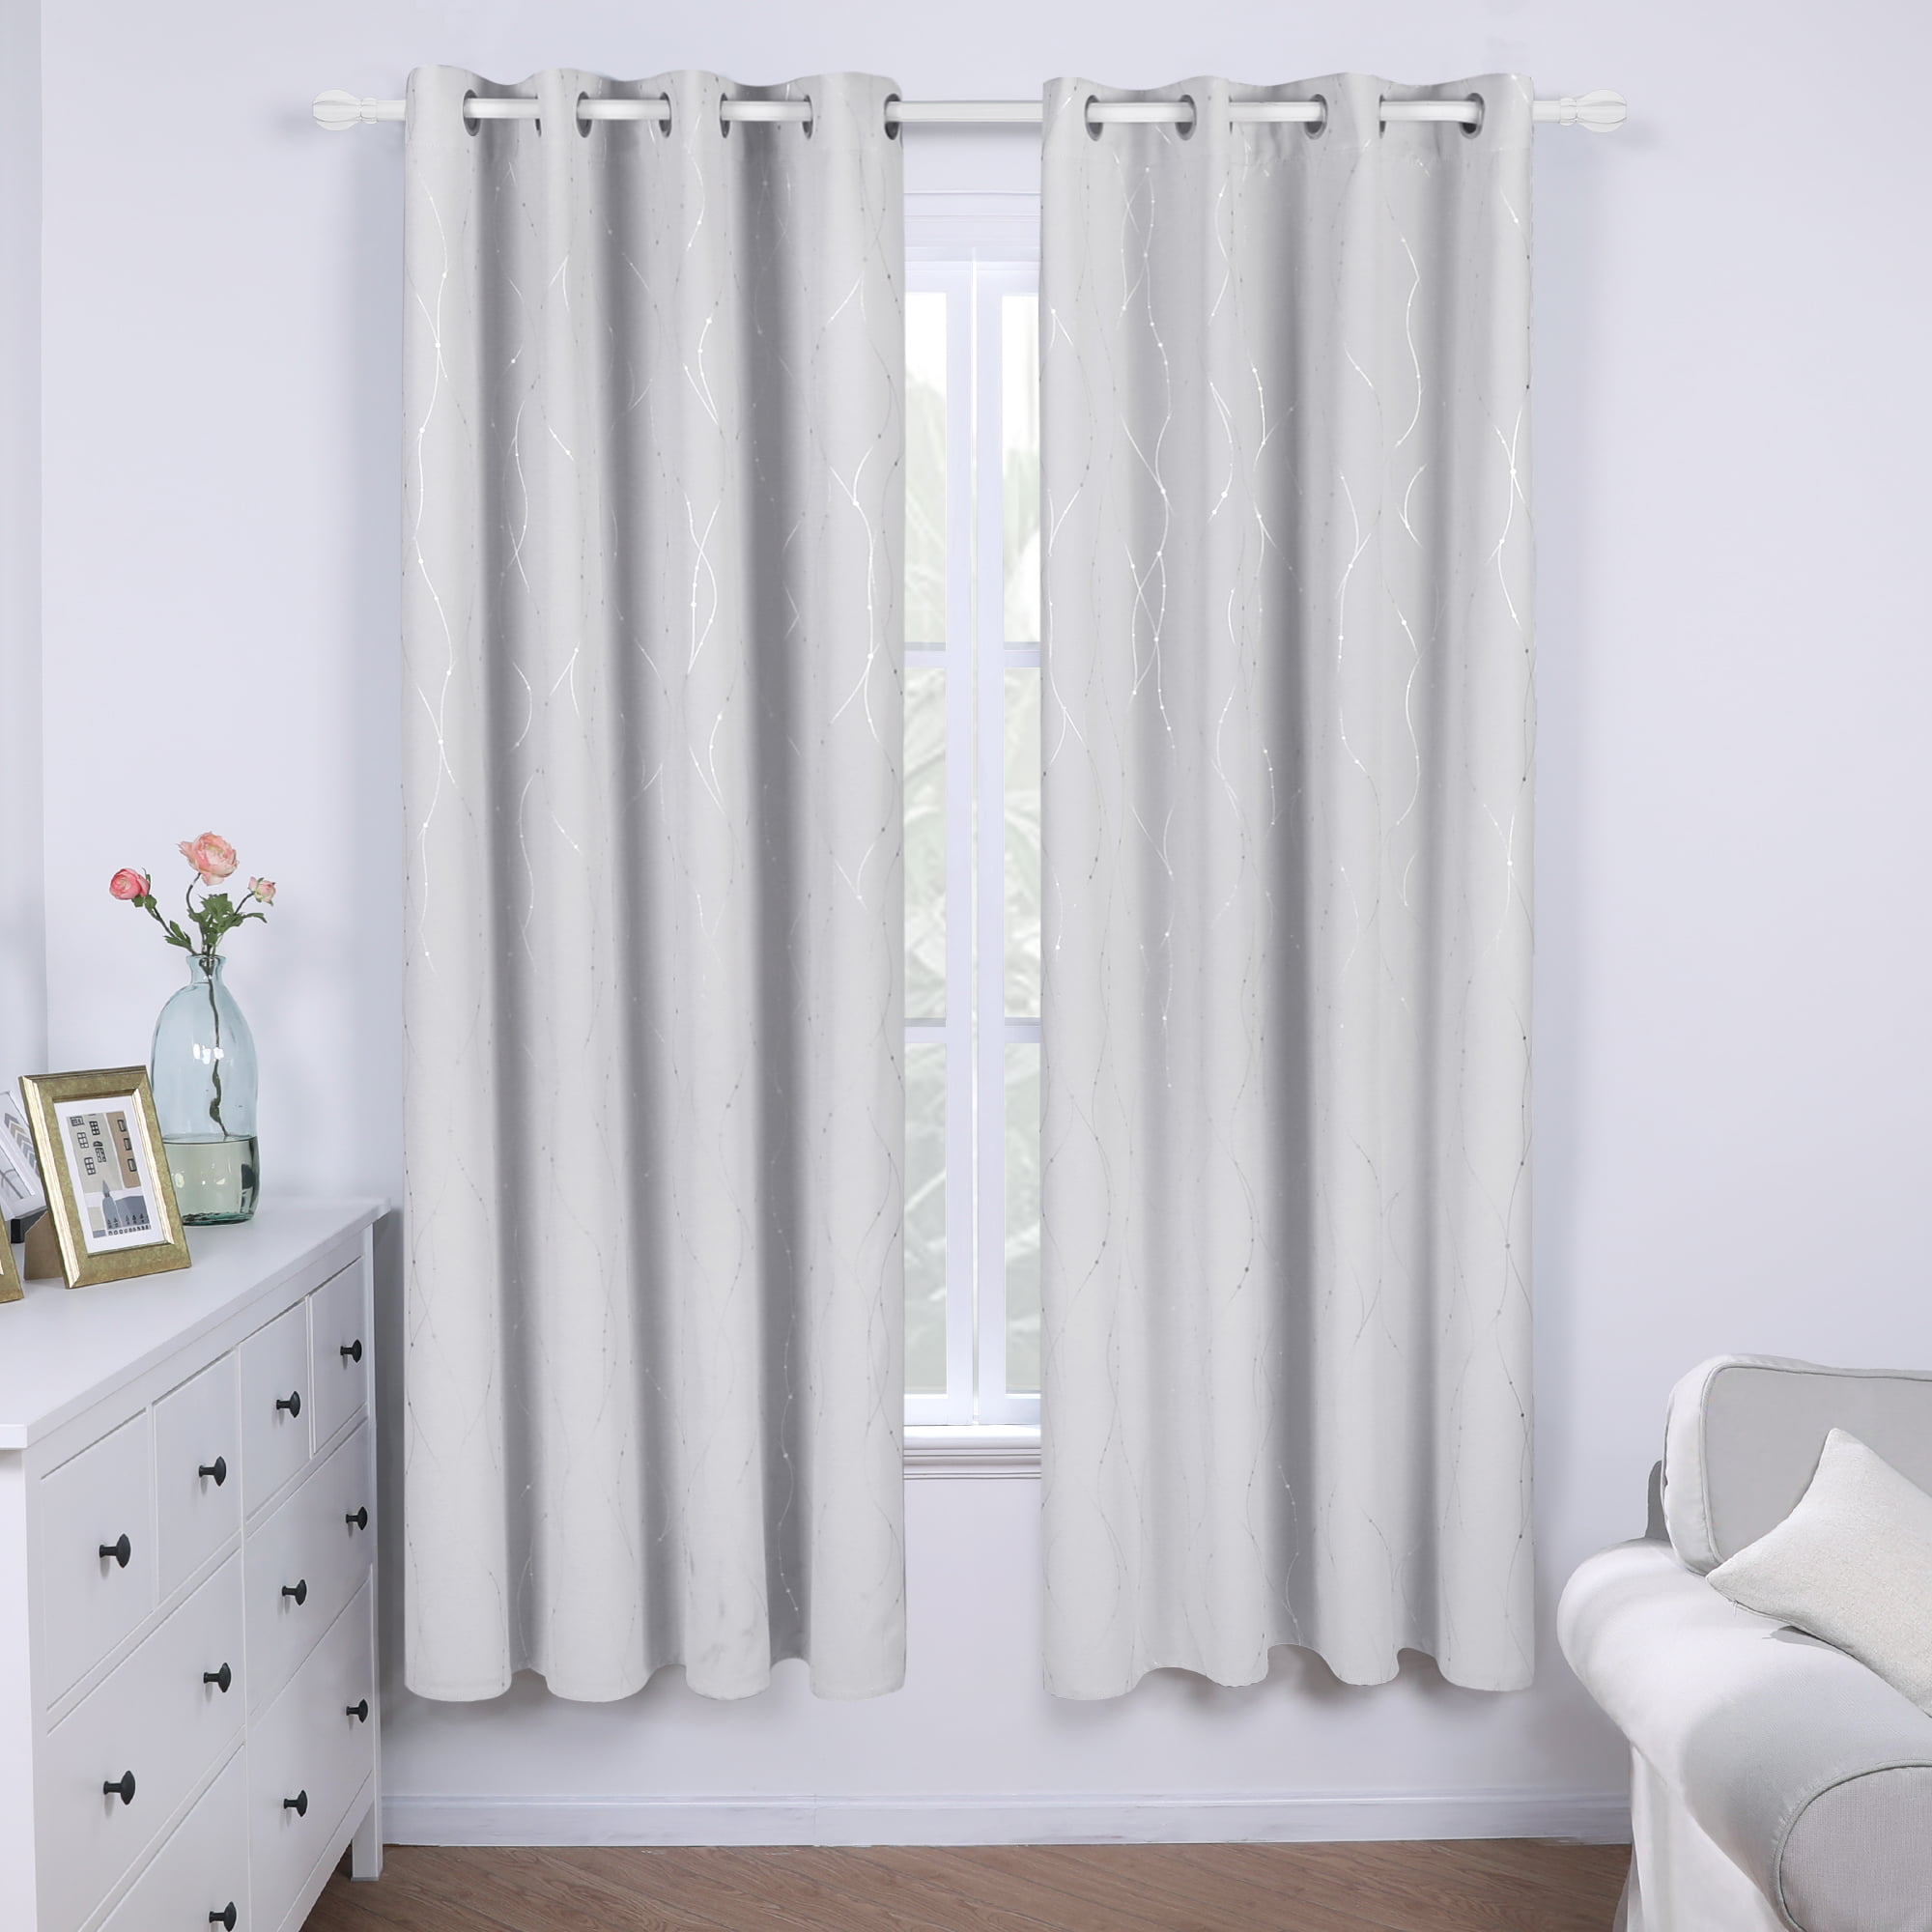 Grey-Wave 52X84Inch Deconovo Jacquard Luxurious Pattern Curtains with Rod Pocket Window Panels for Kids Room